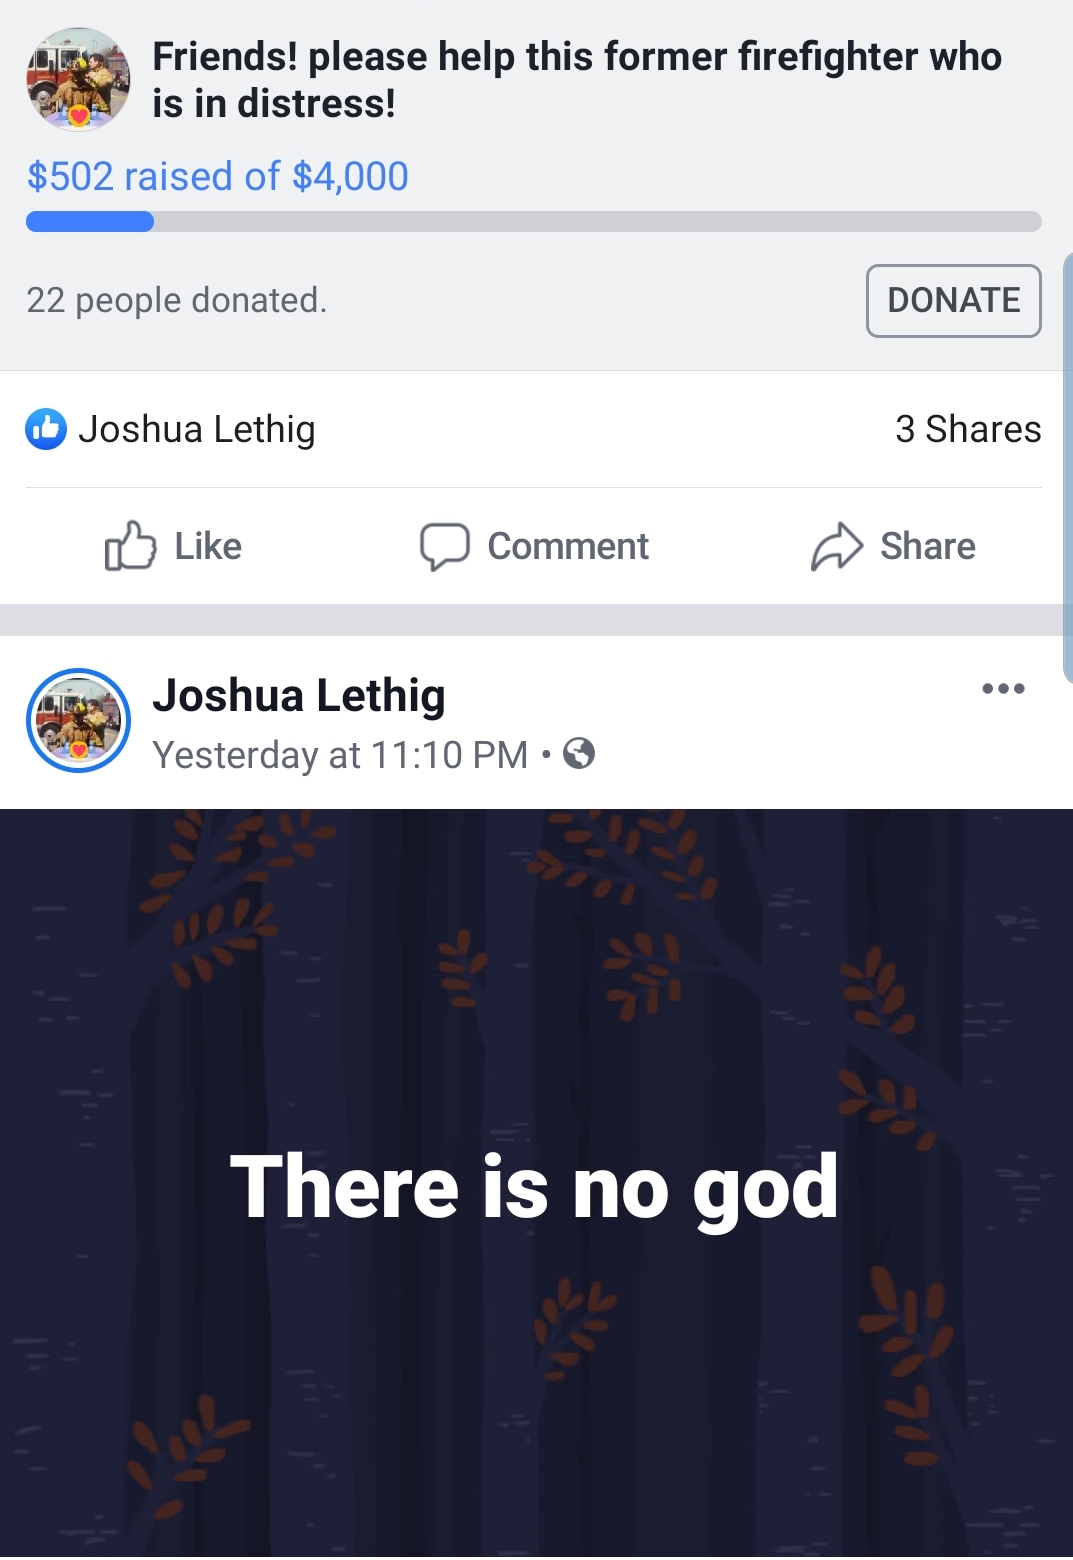 say no to plastic bags - Friends! please help this former firefighter who is in distress! $502 raised of $4,000 22 people donated. Donate Joshua Lethig 3 Comment Joshua Lethig Yesterday at There is no god